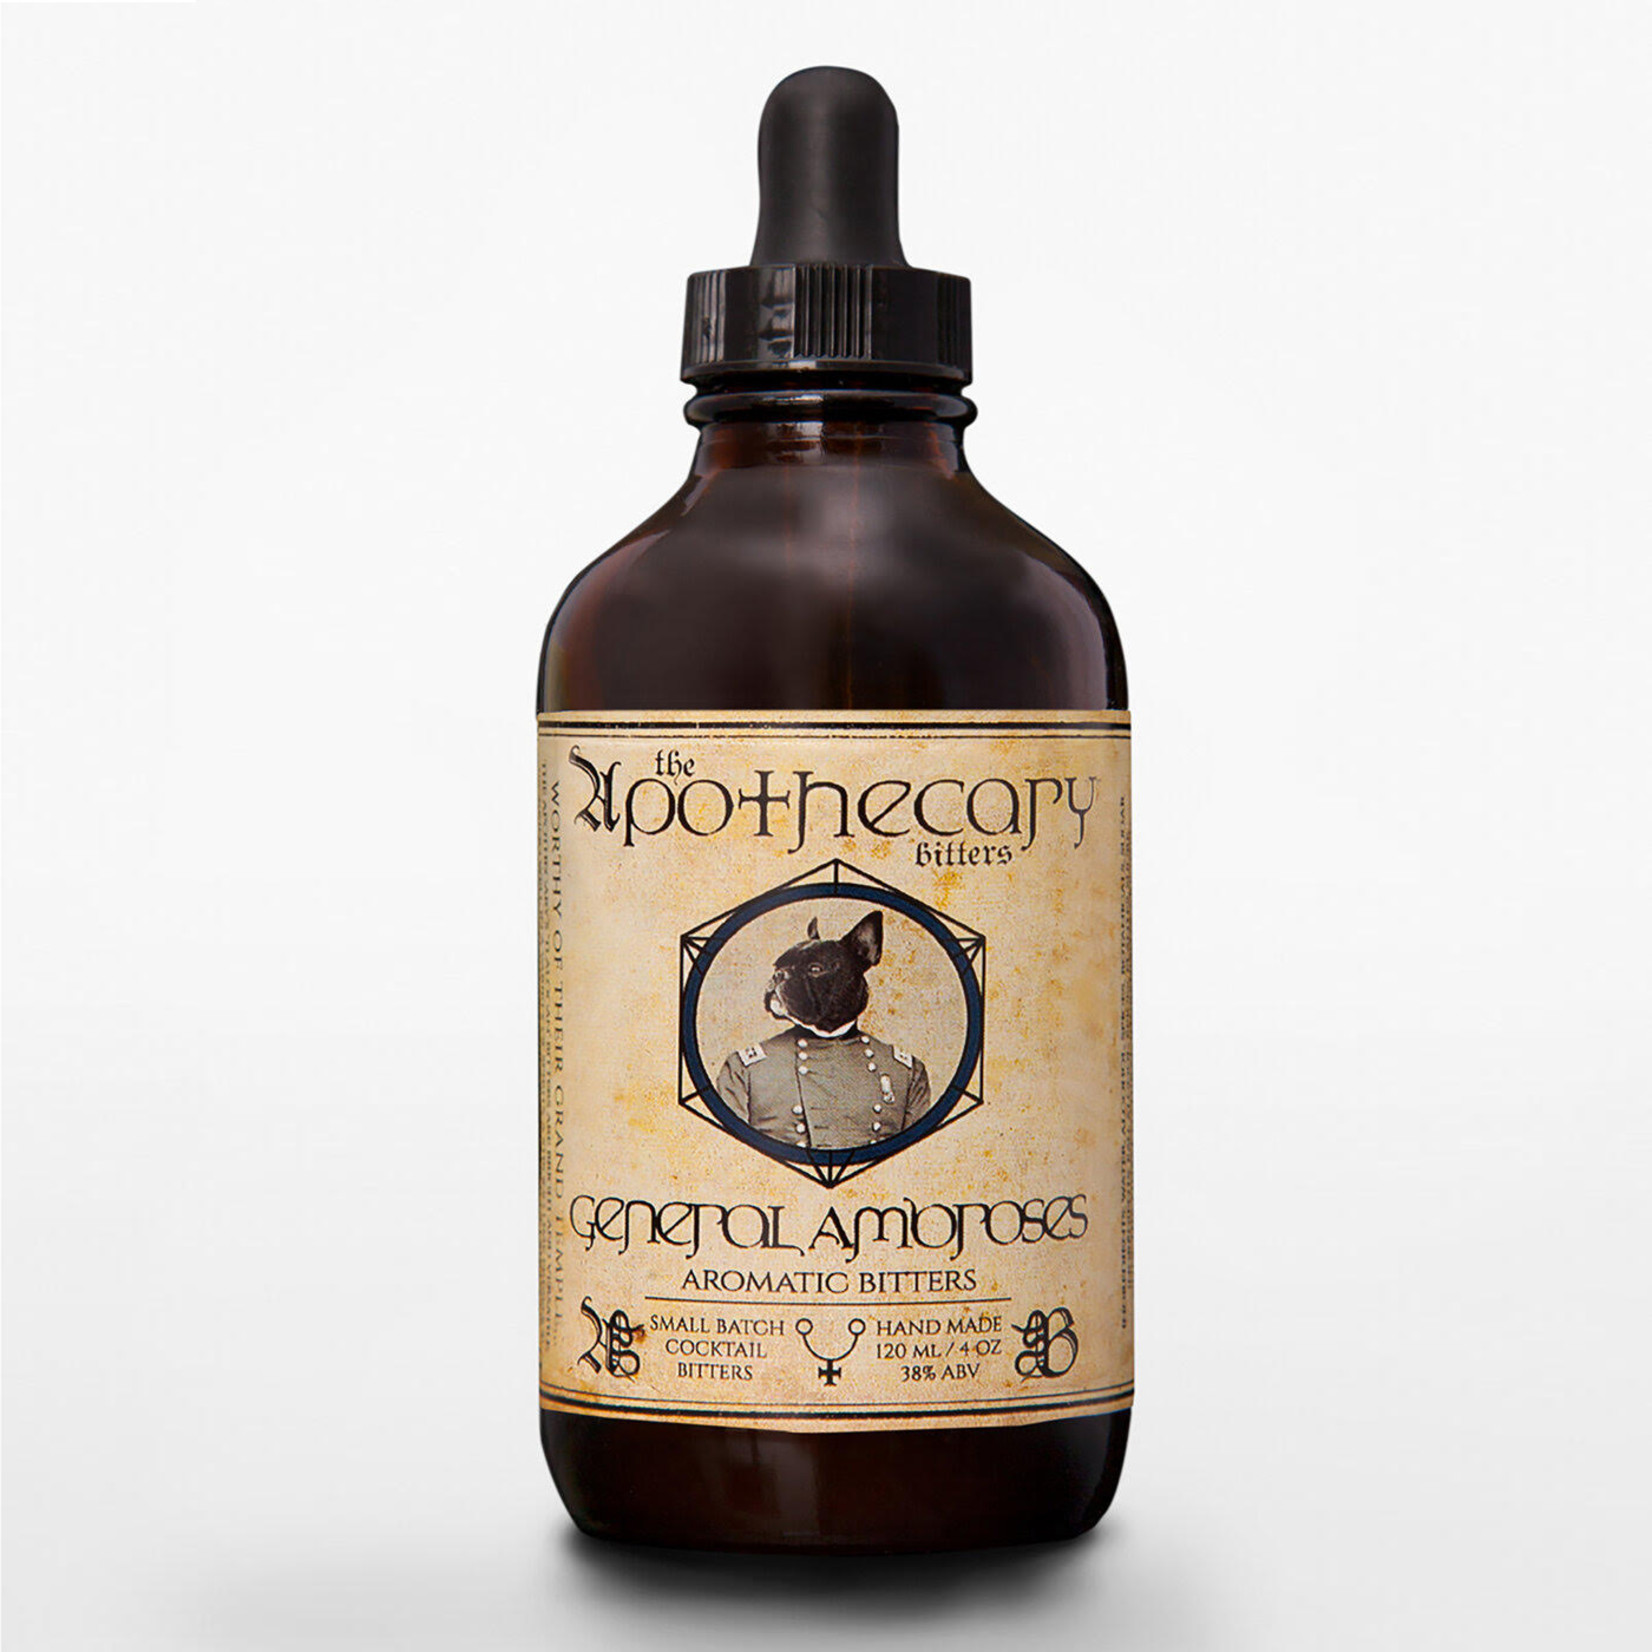 Apothecary Apothecary Bitters Aromatic